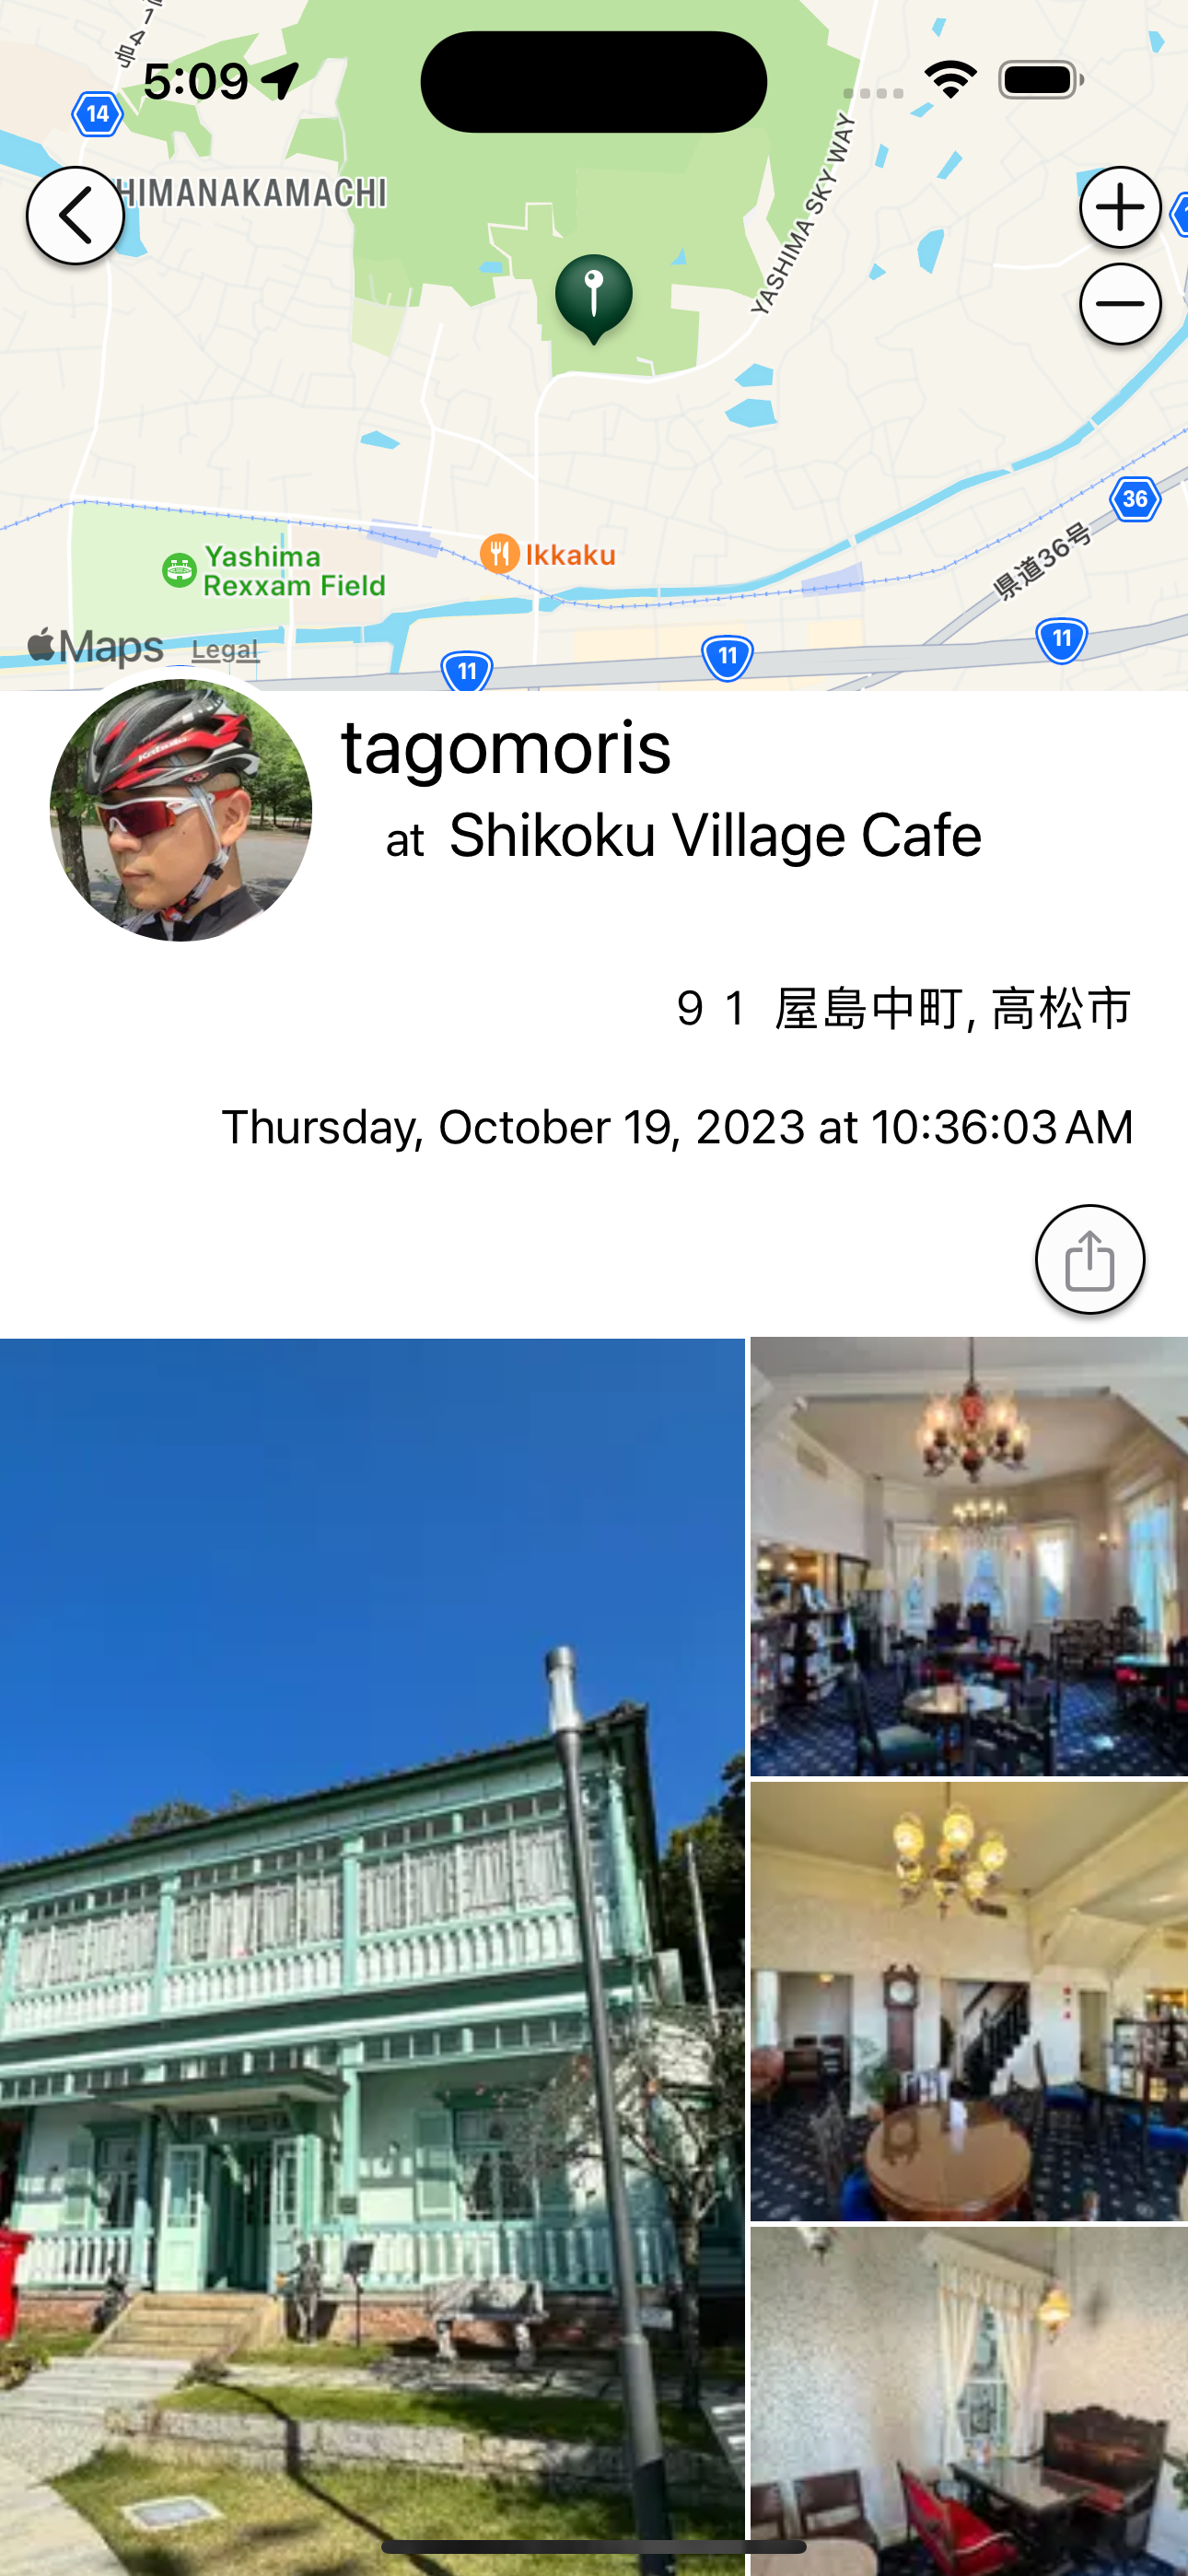 https://pathtraq.tagomor.is/app_view_checkin.png